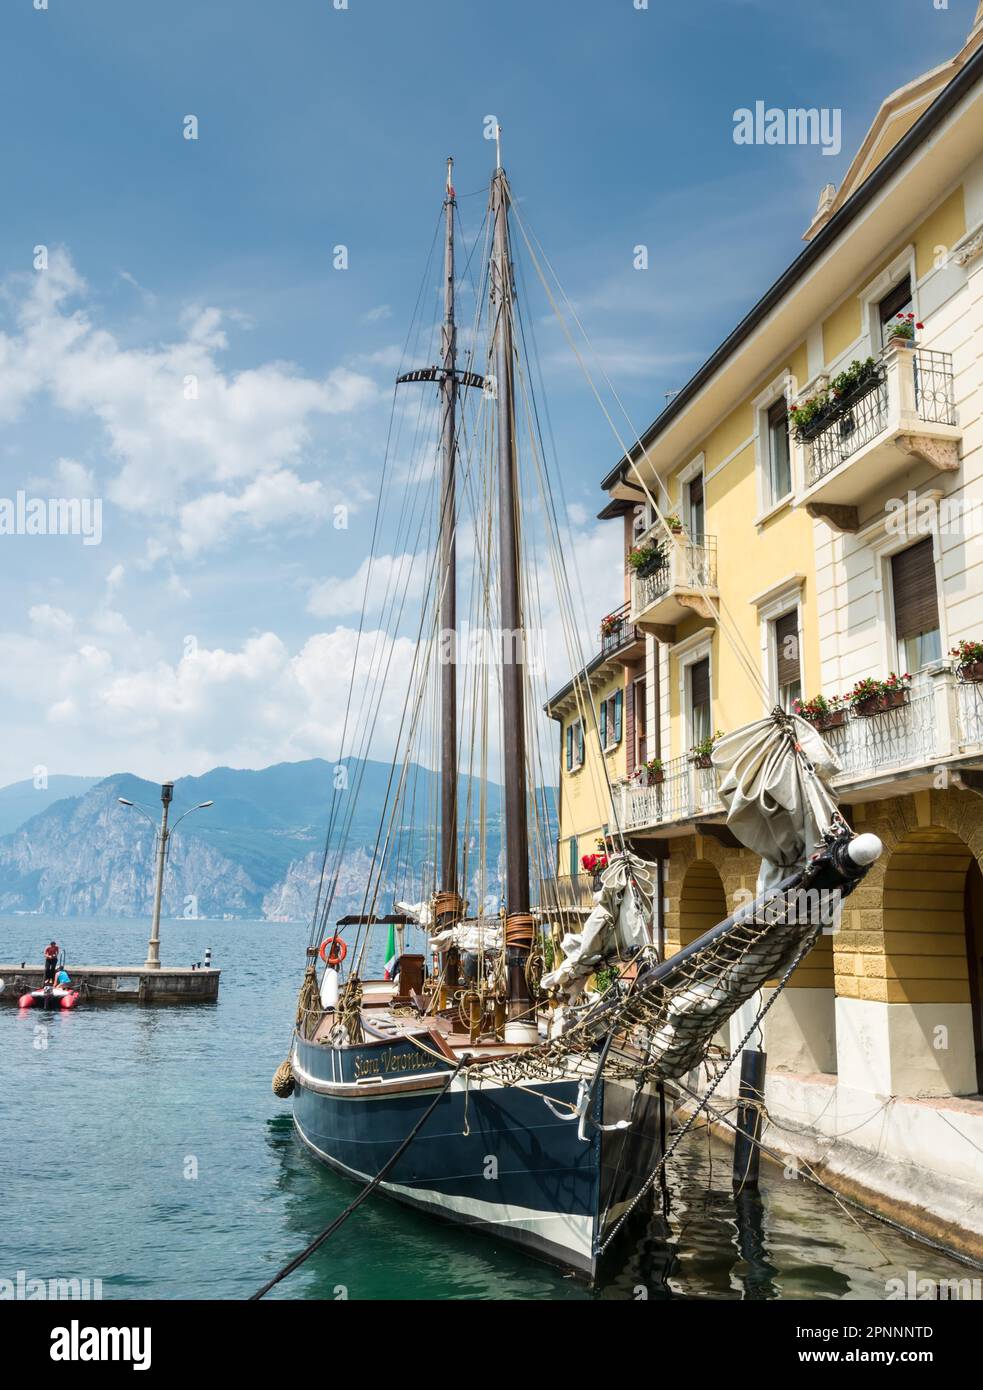 MALCESINE, ITALY - JUNE 1: Historic ship Siora Veronica at Malcesine, Italy on June 1, 2015. The sailing ship was built 1926. Foto taken from piazza Stock Photo